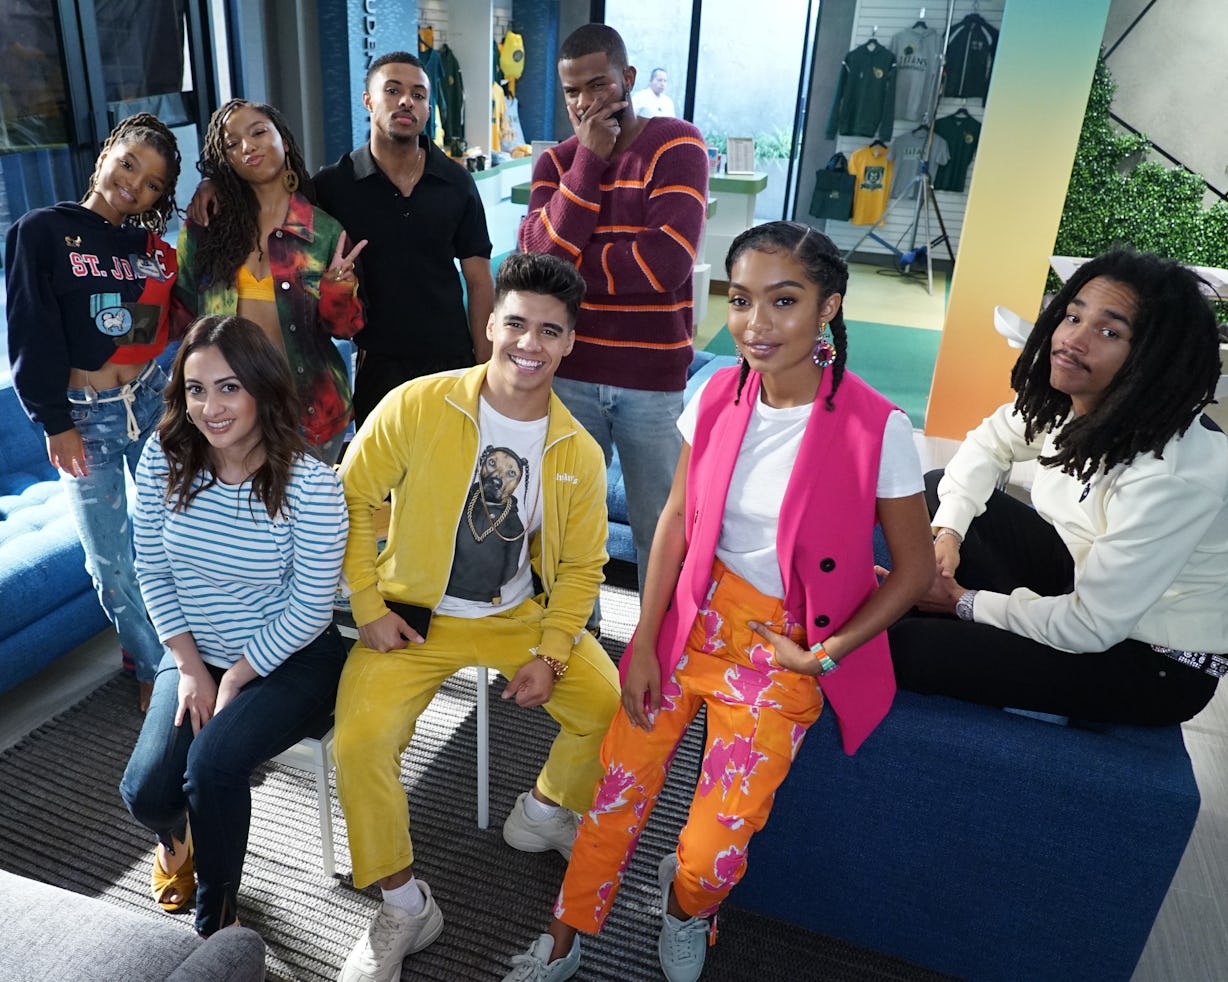 'Grown-ish' Season 4: Premiere Date, Cast, & Everything We Know